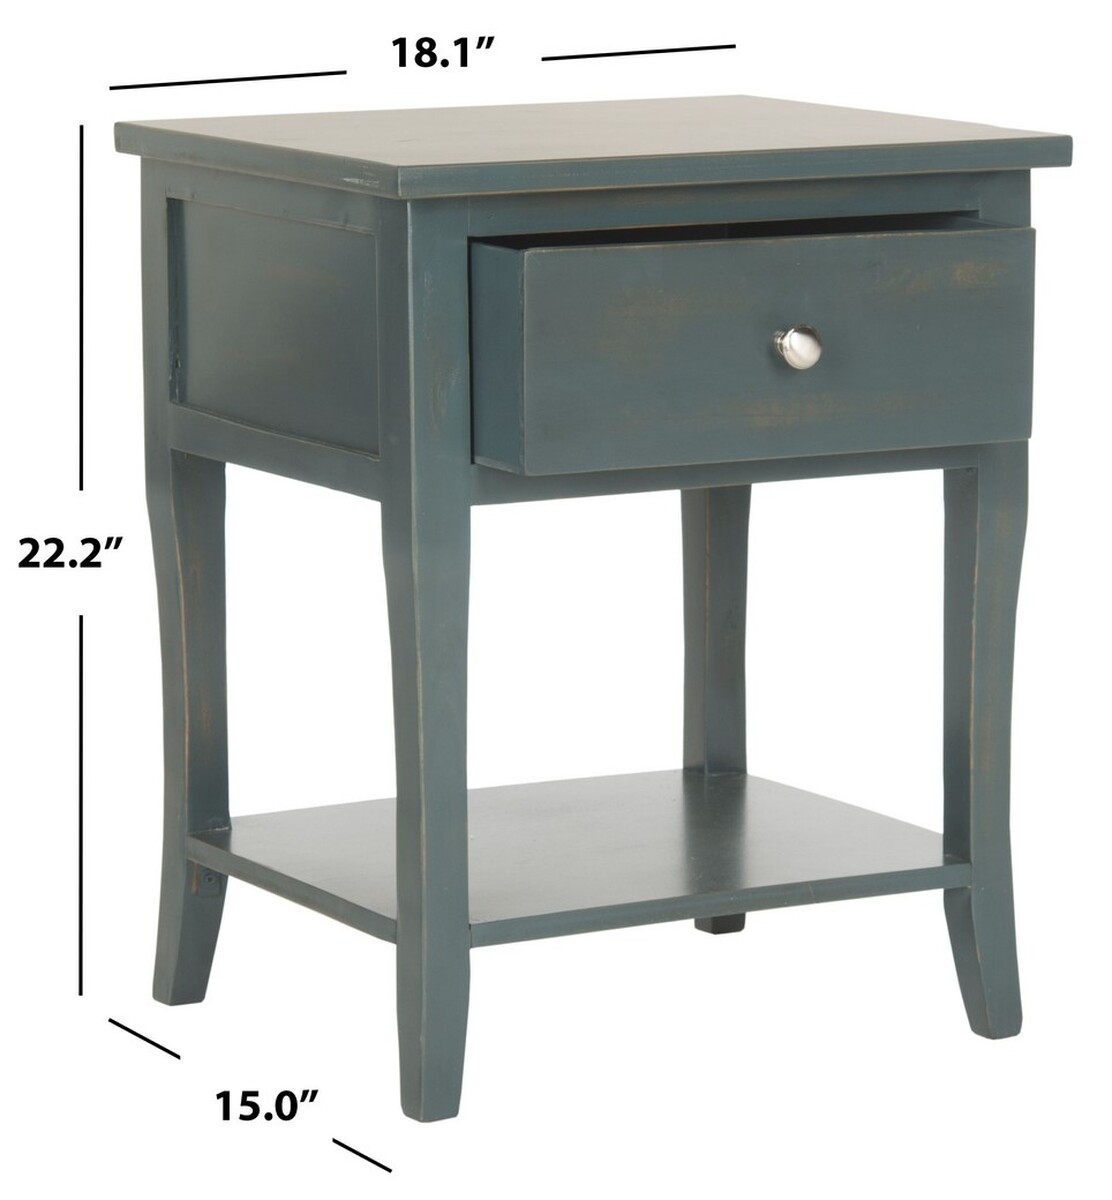 Coby Nightstand With Storage Drawer - Steel Teal - Arlo Home - Image 3